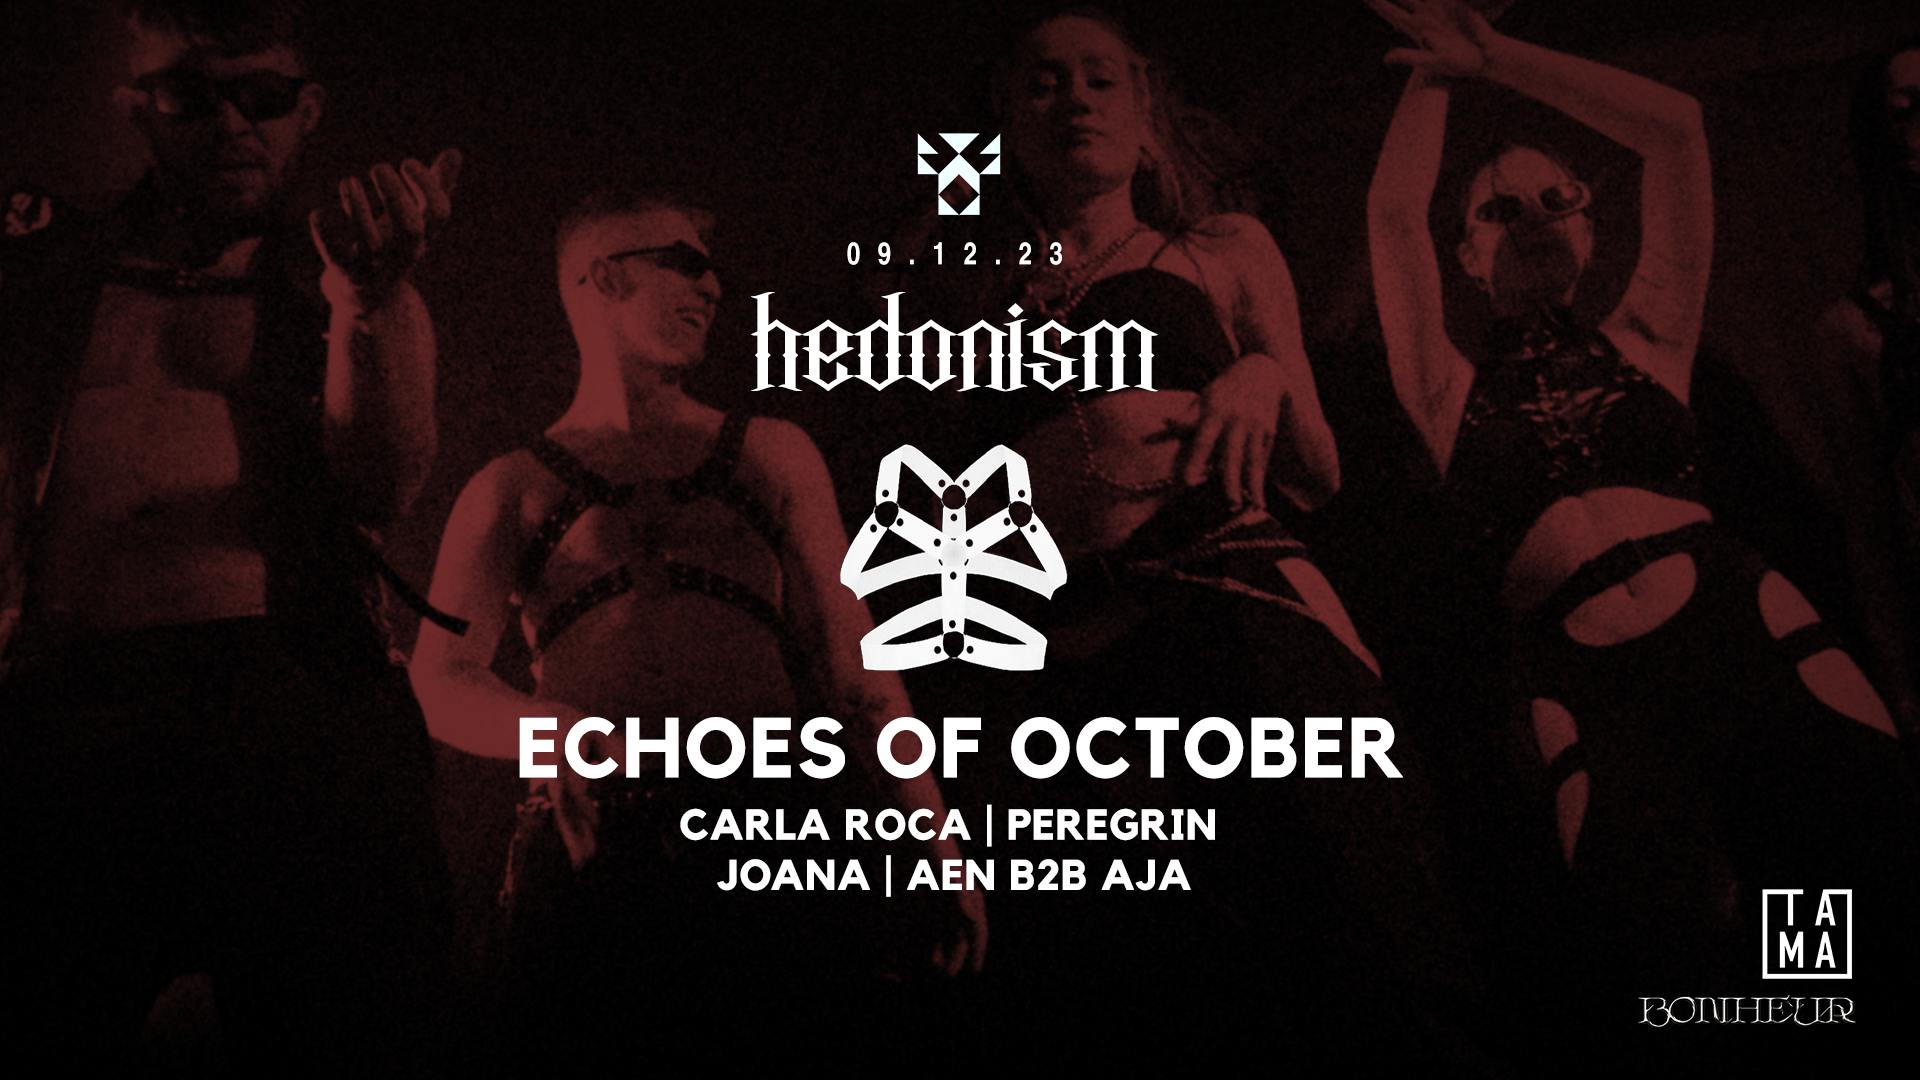 Hedonism: ECHOES OF OCTOBER